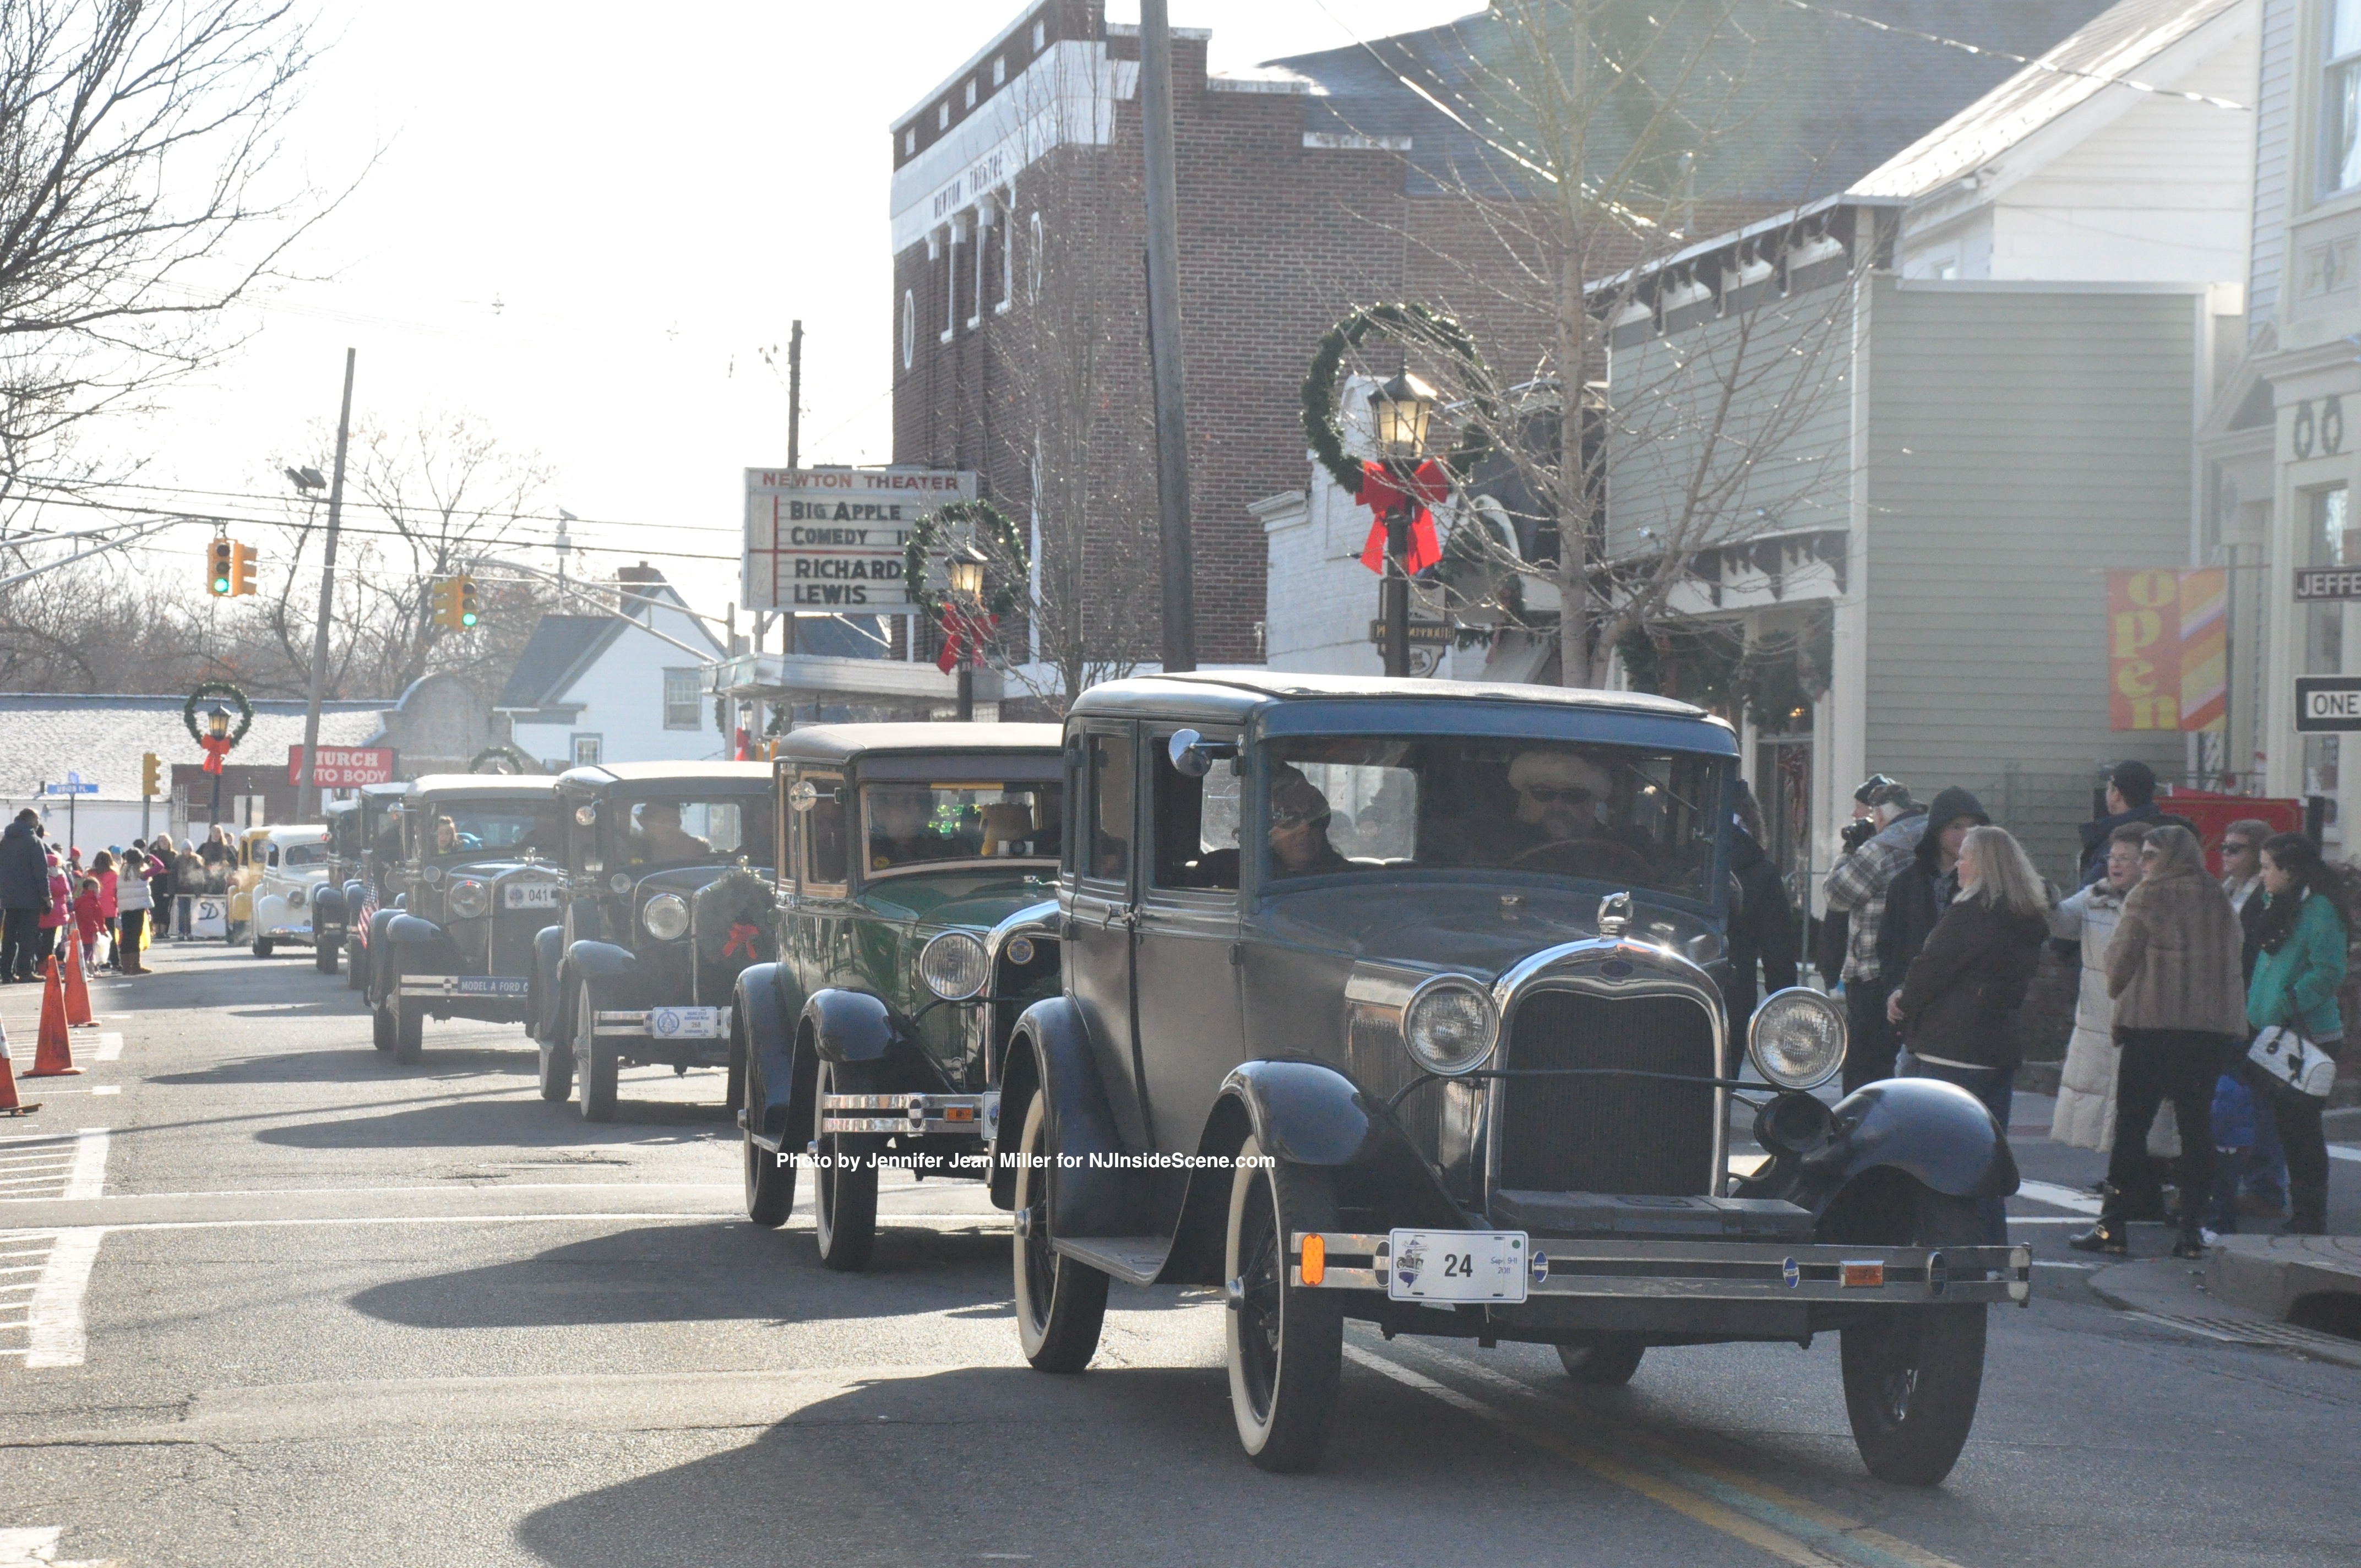 Antique cars file along Spring Street, offering a nod to yesteryear.